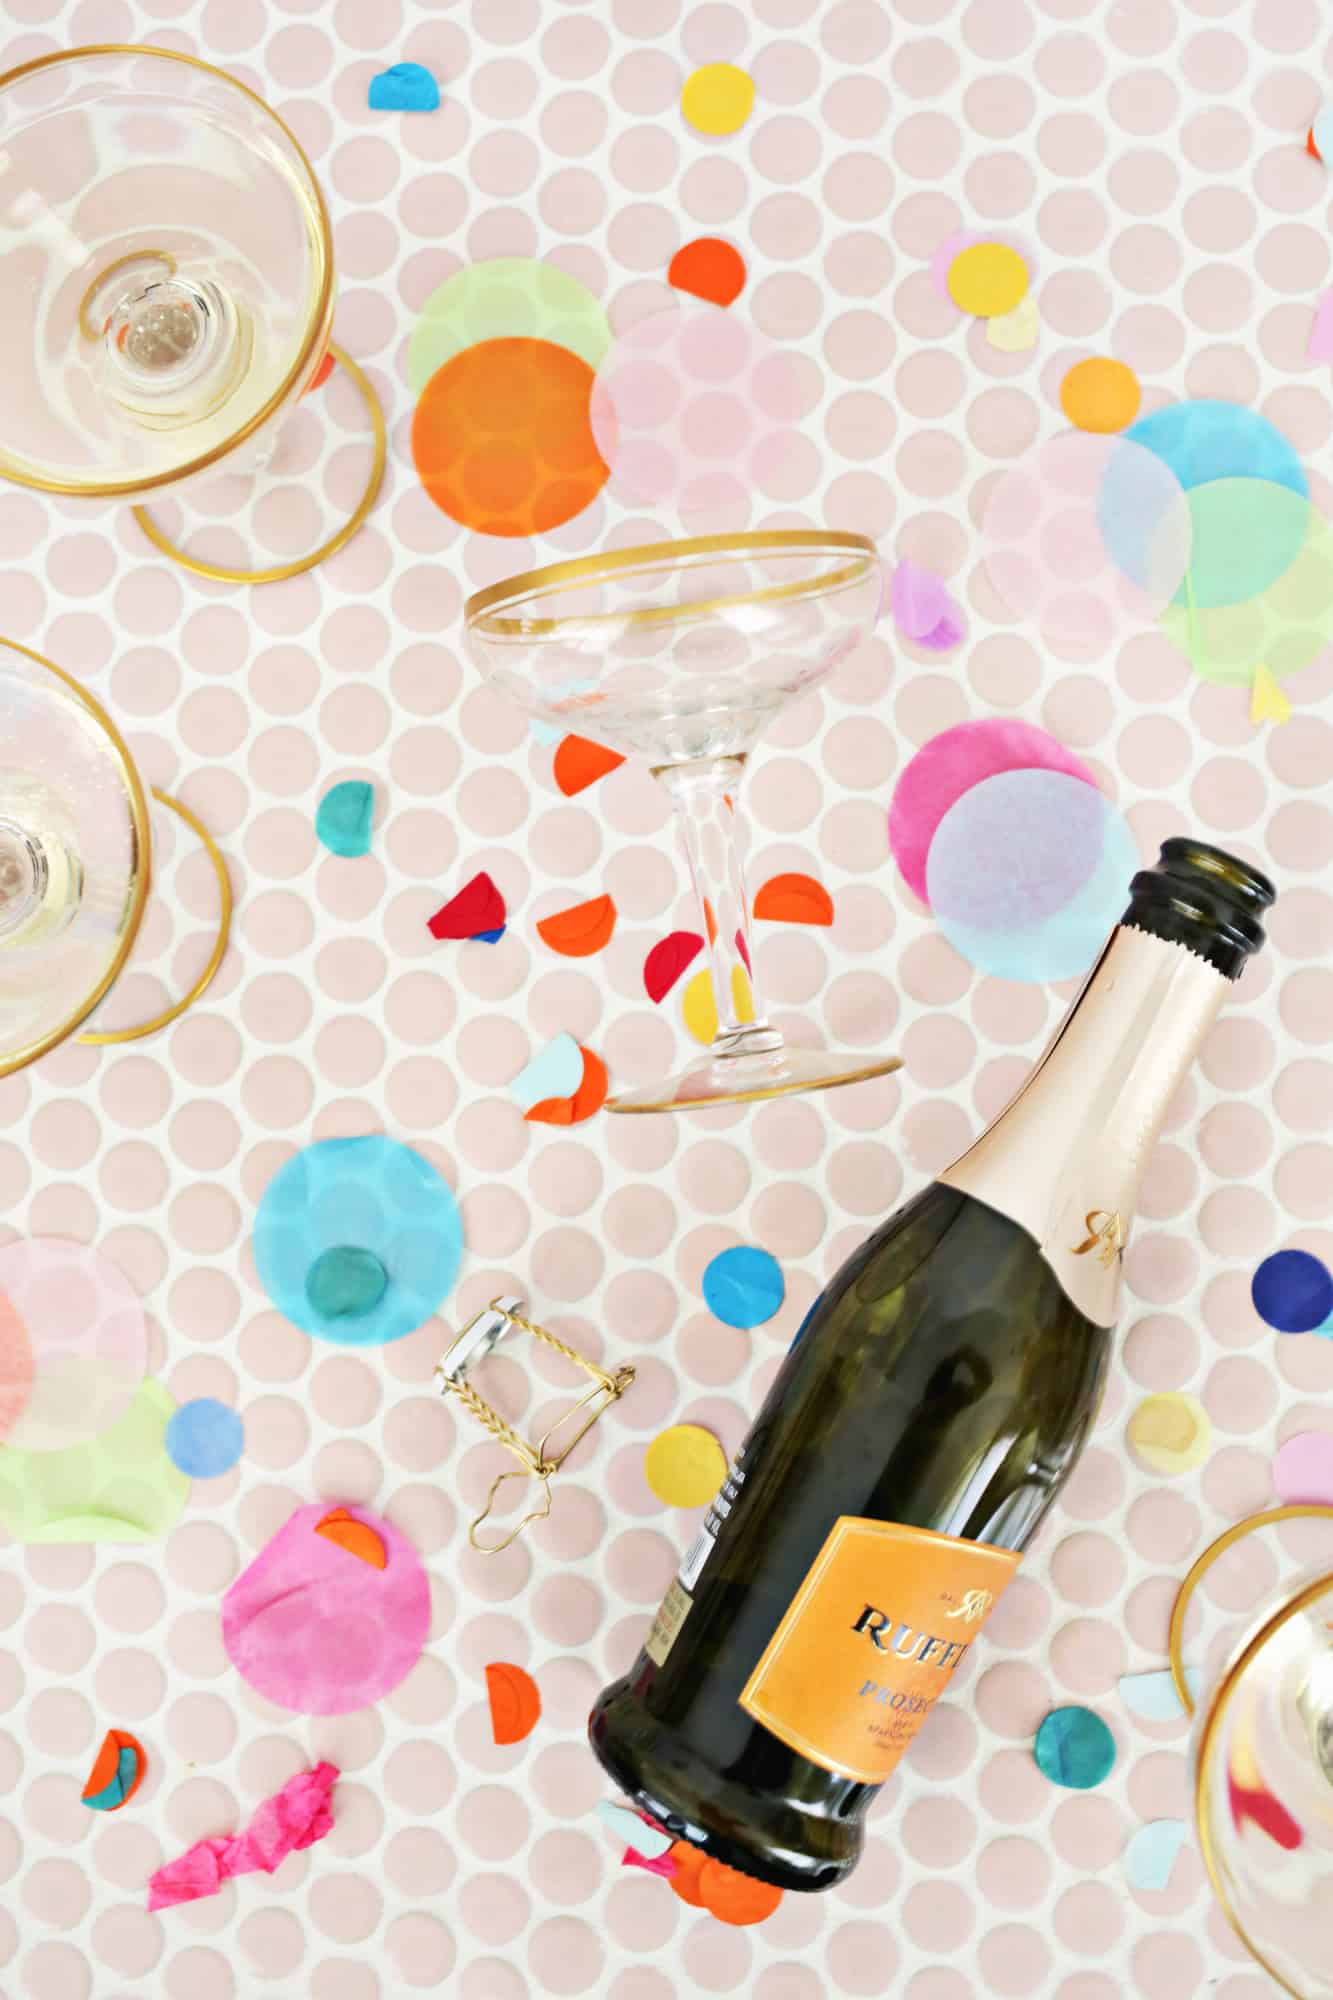 https://abeautifulmess.com/wp-content/uploads/2018/11/How-To-Build-A-Champagne-Tower-click-through-for-tutorial.jpg